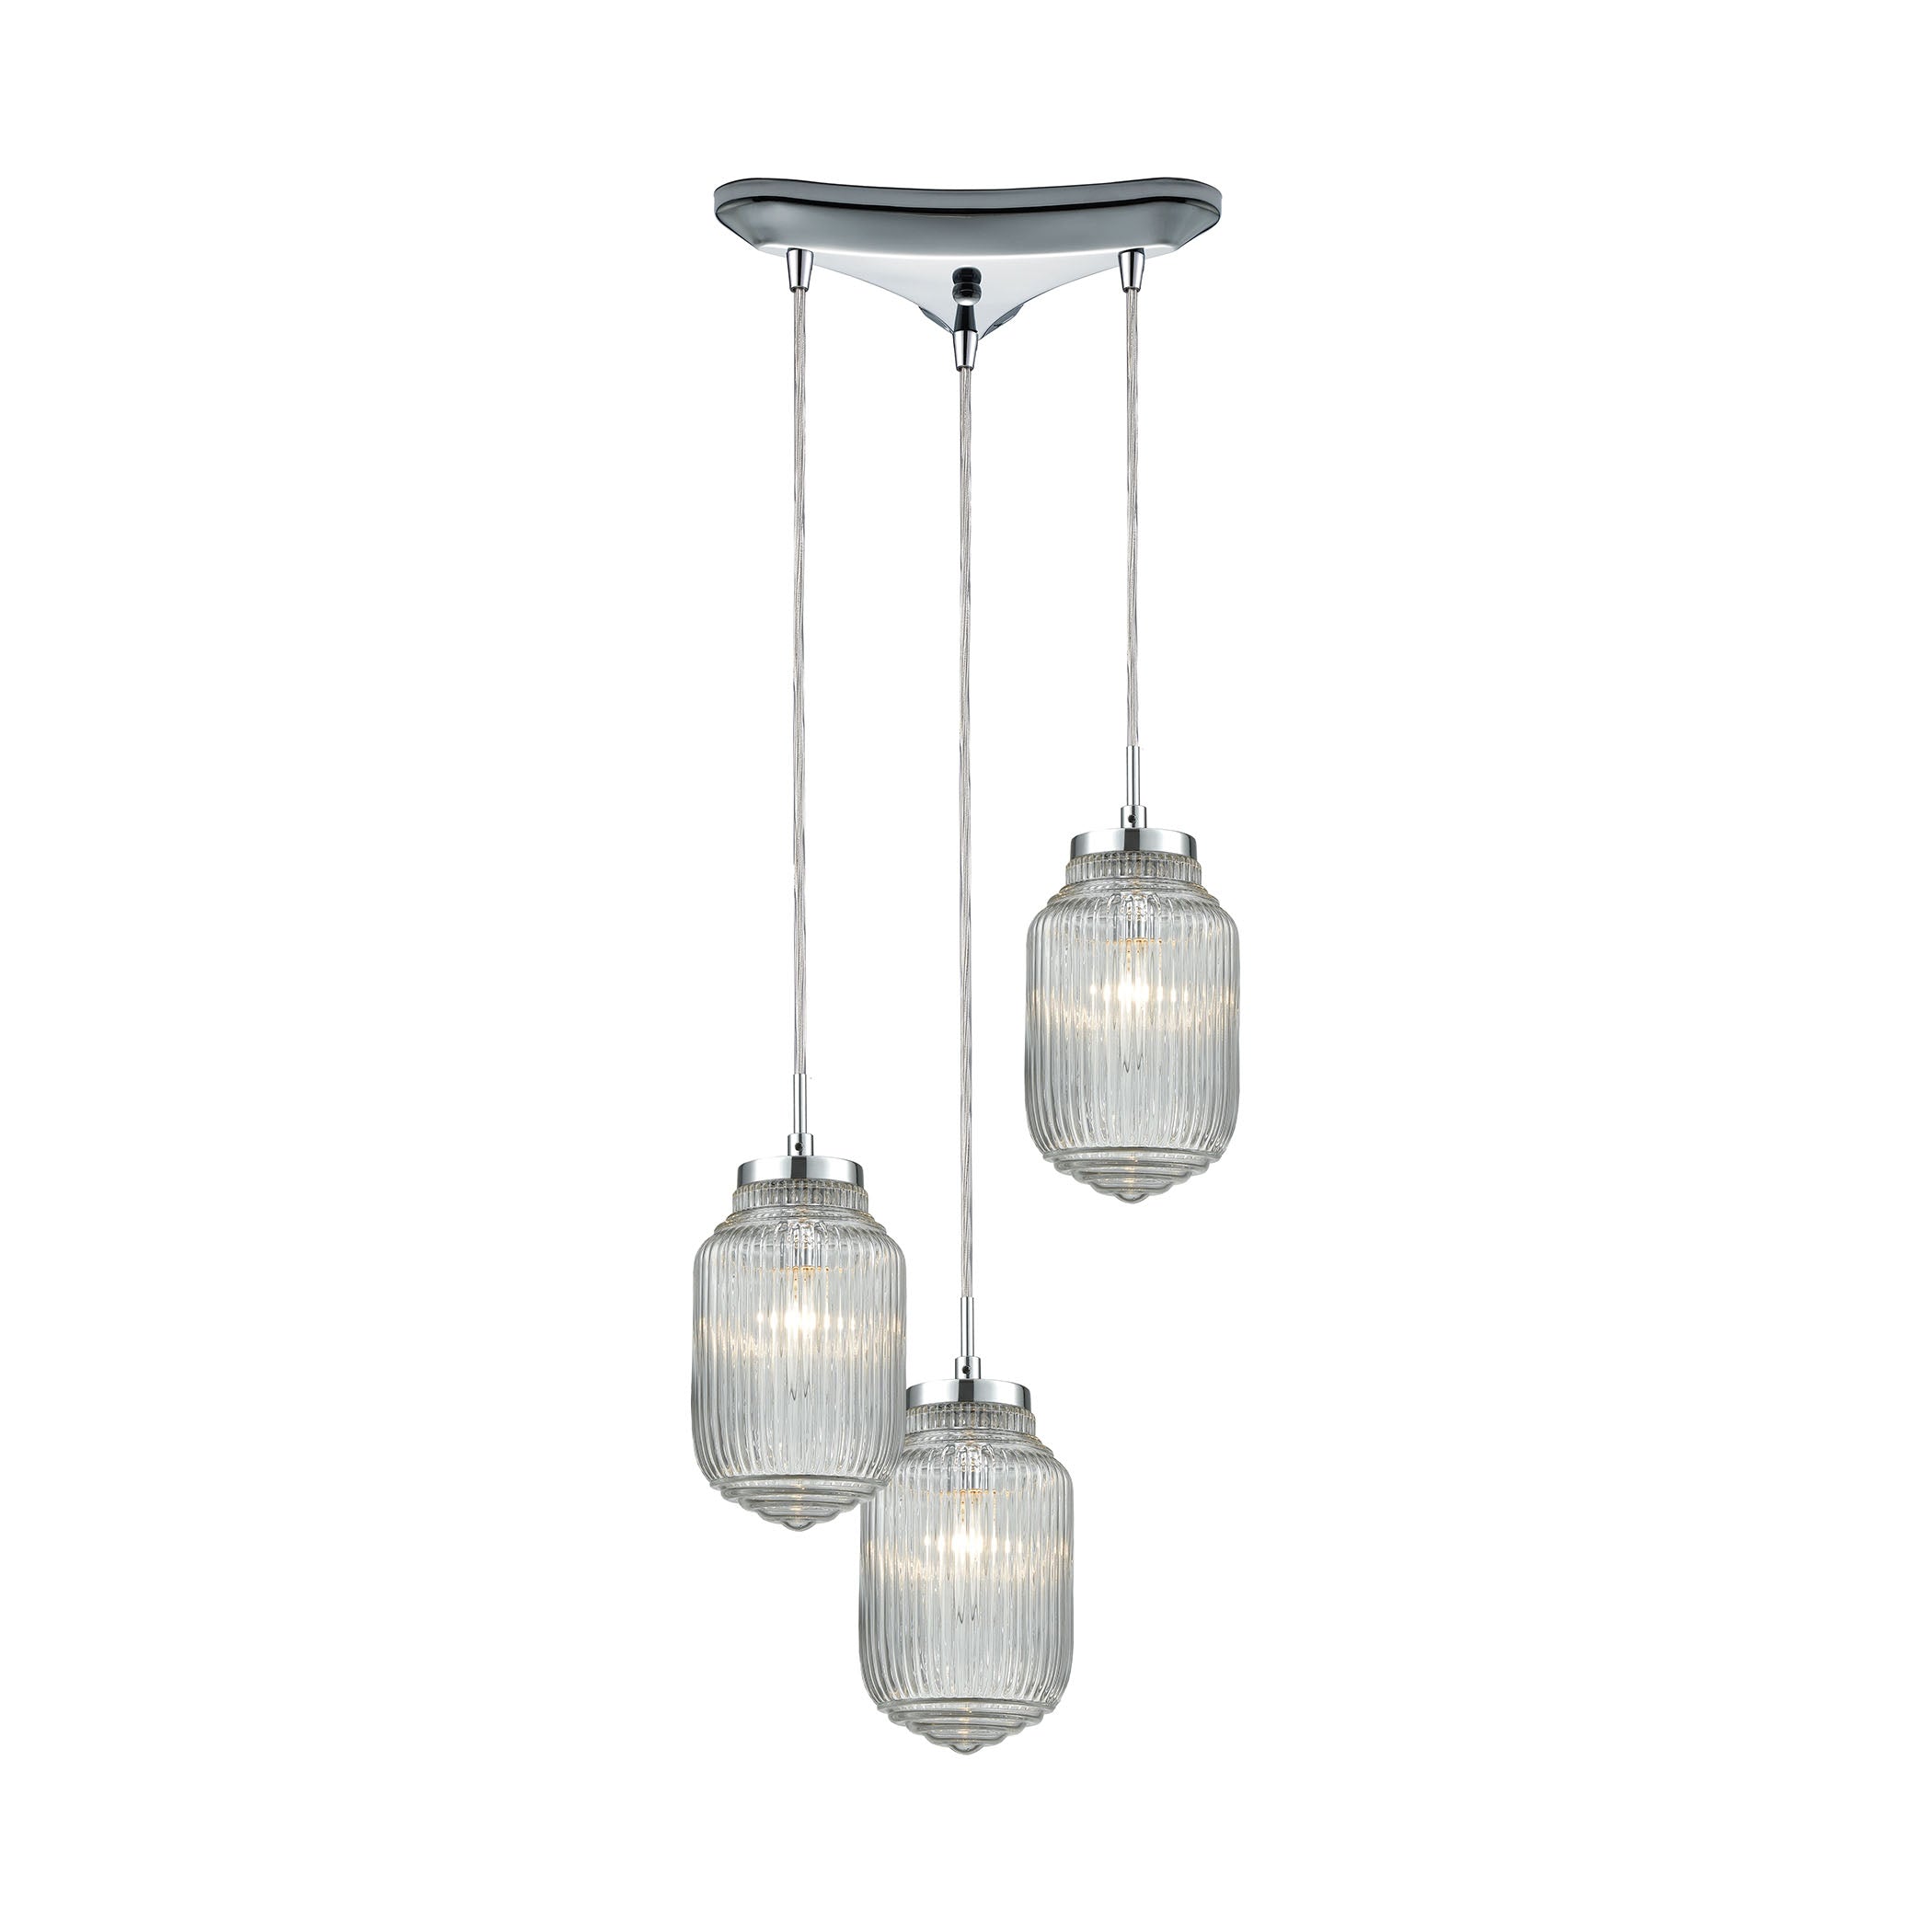 ELK Lighting 56662/3 Dubois 3-Light Triangular Pendant Fixture in Polished Chrome with Clear Ribbed Glass